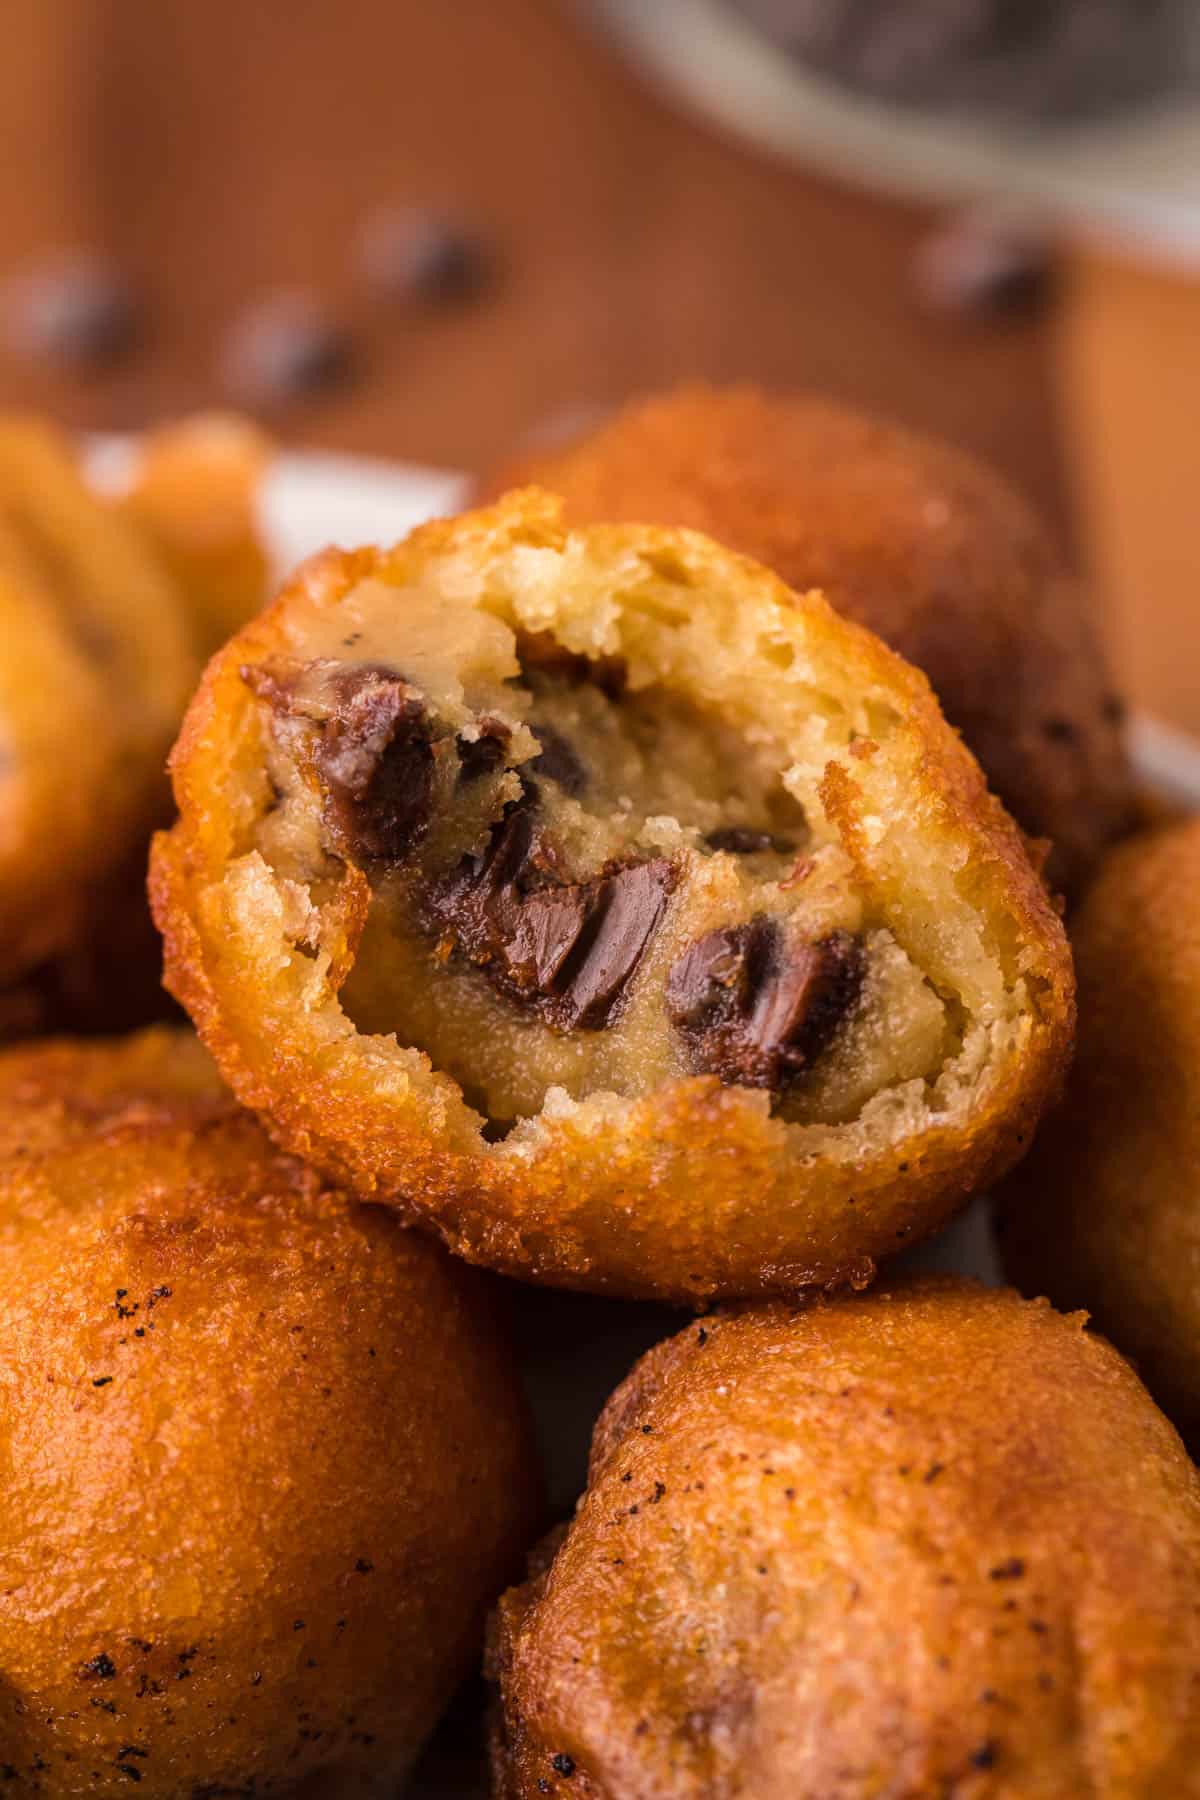 A close shot of cookie dough fried in batter with a bite taken out of it.